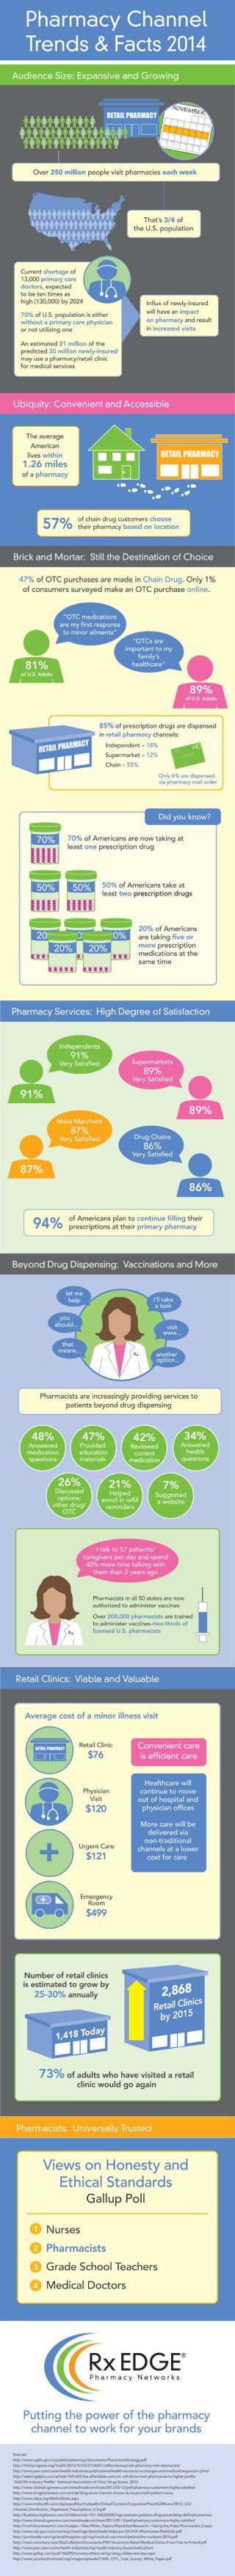 Rx EDGE: Retail Pharmacy Trends & Facts Infographic